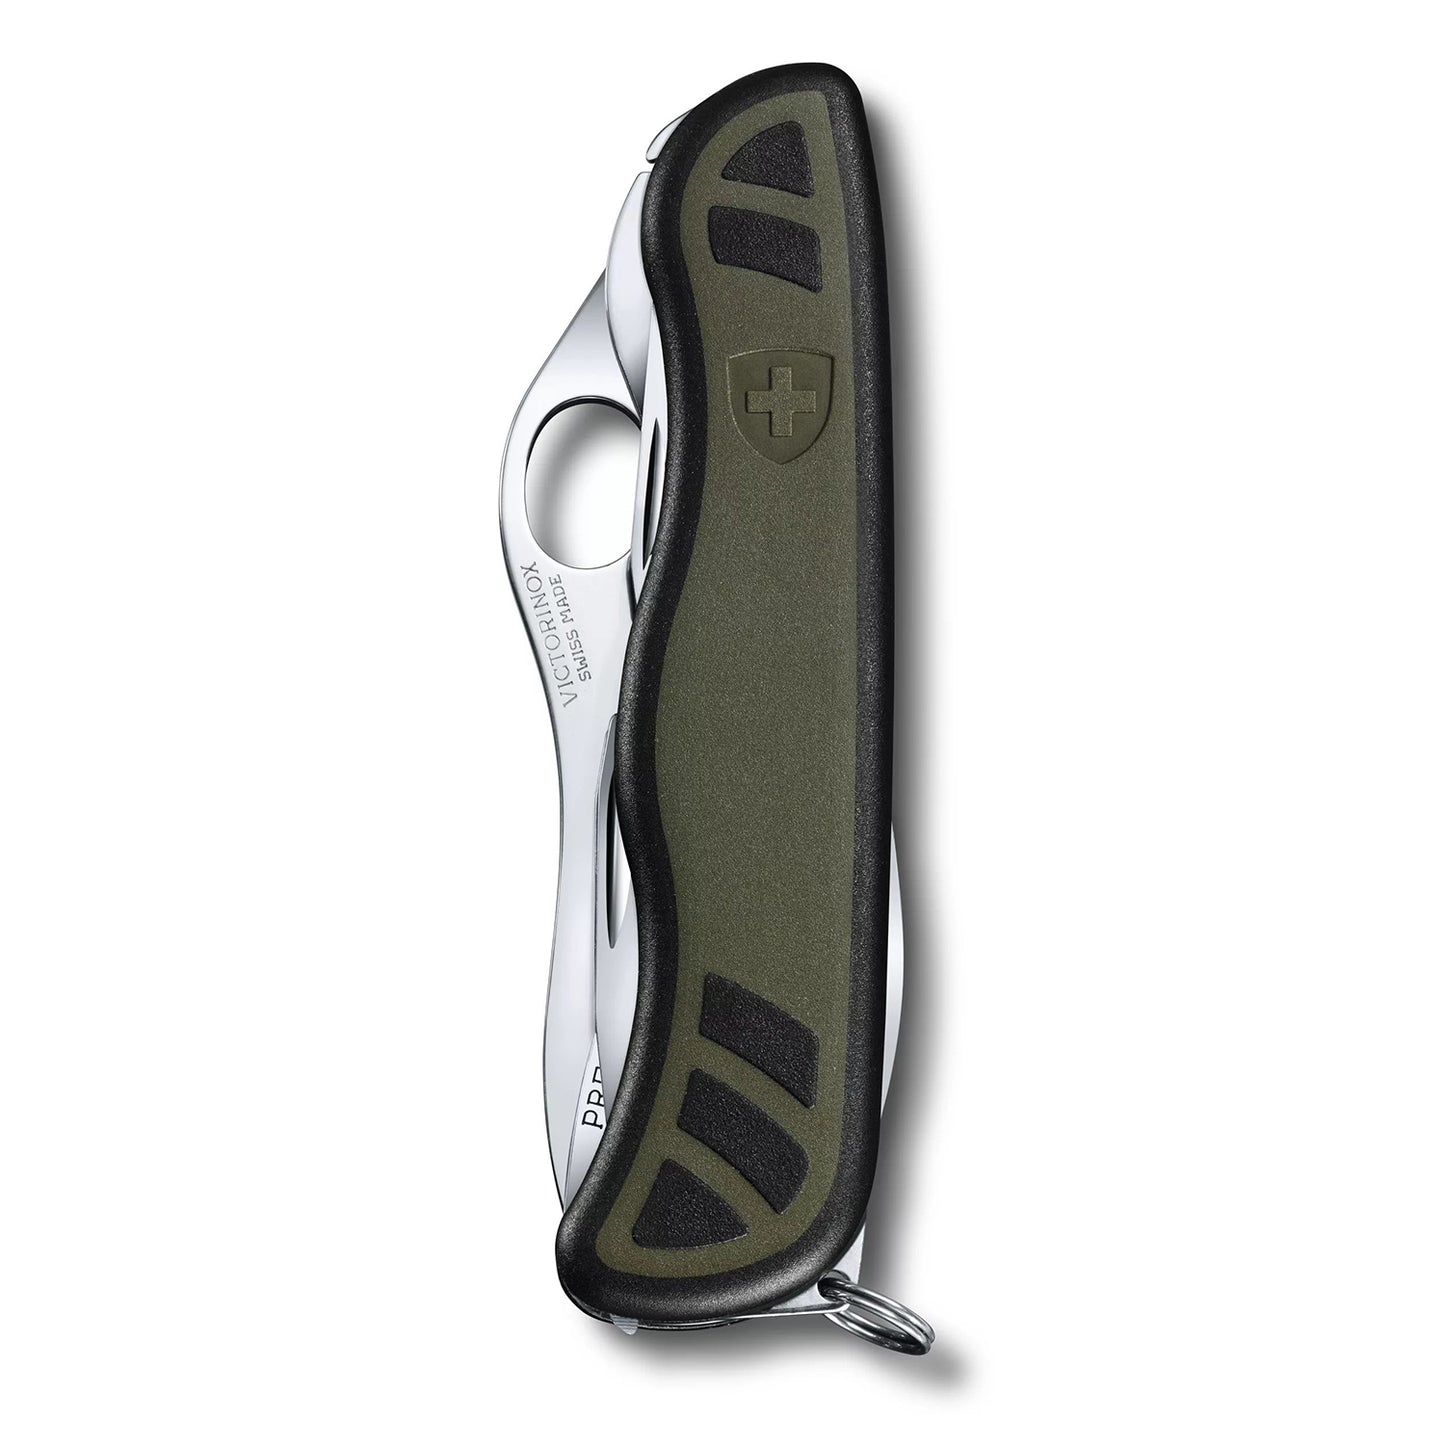 Victorinox Swiss Soldier's Knife 08: The Essential Outdoor Companion